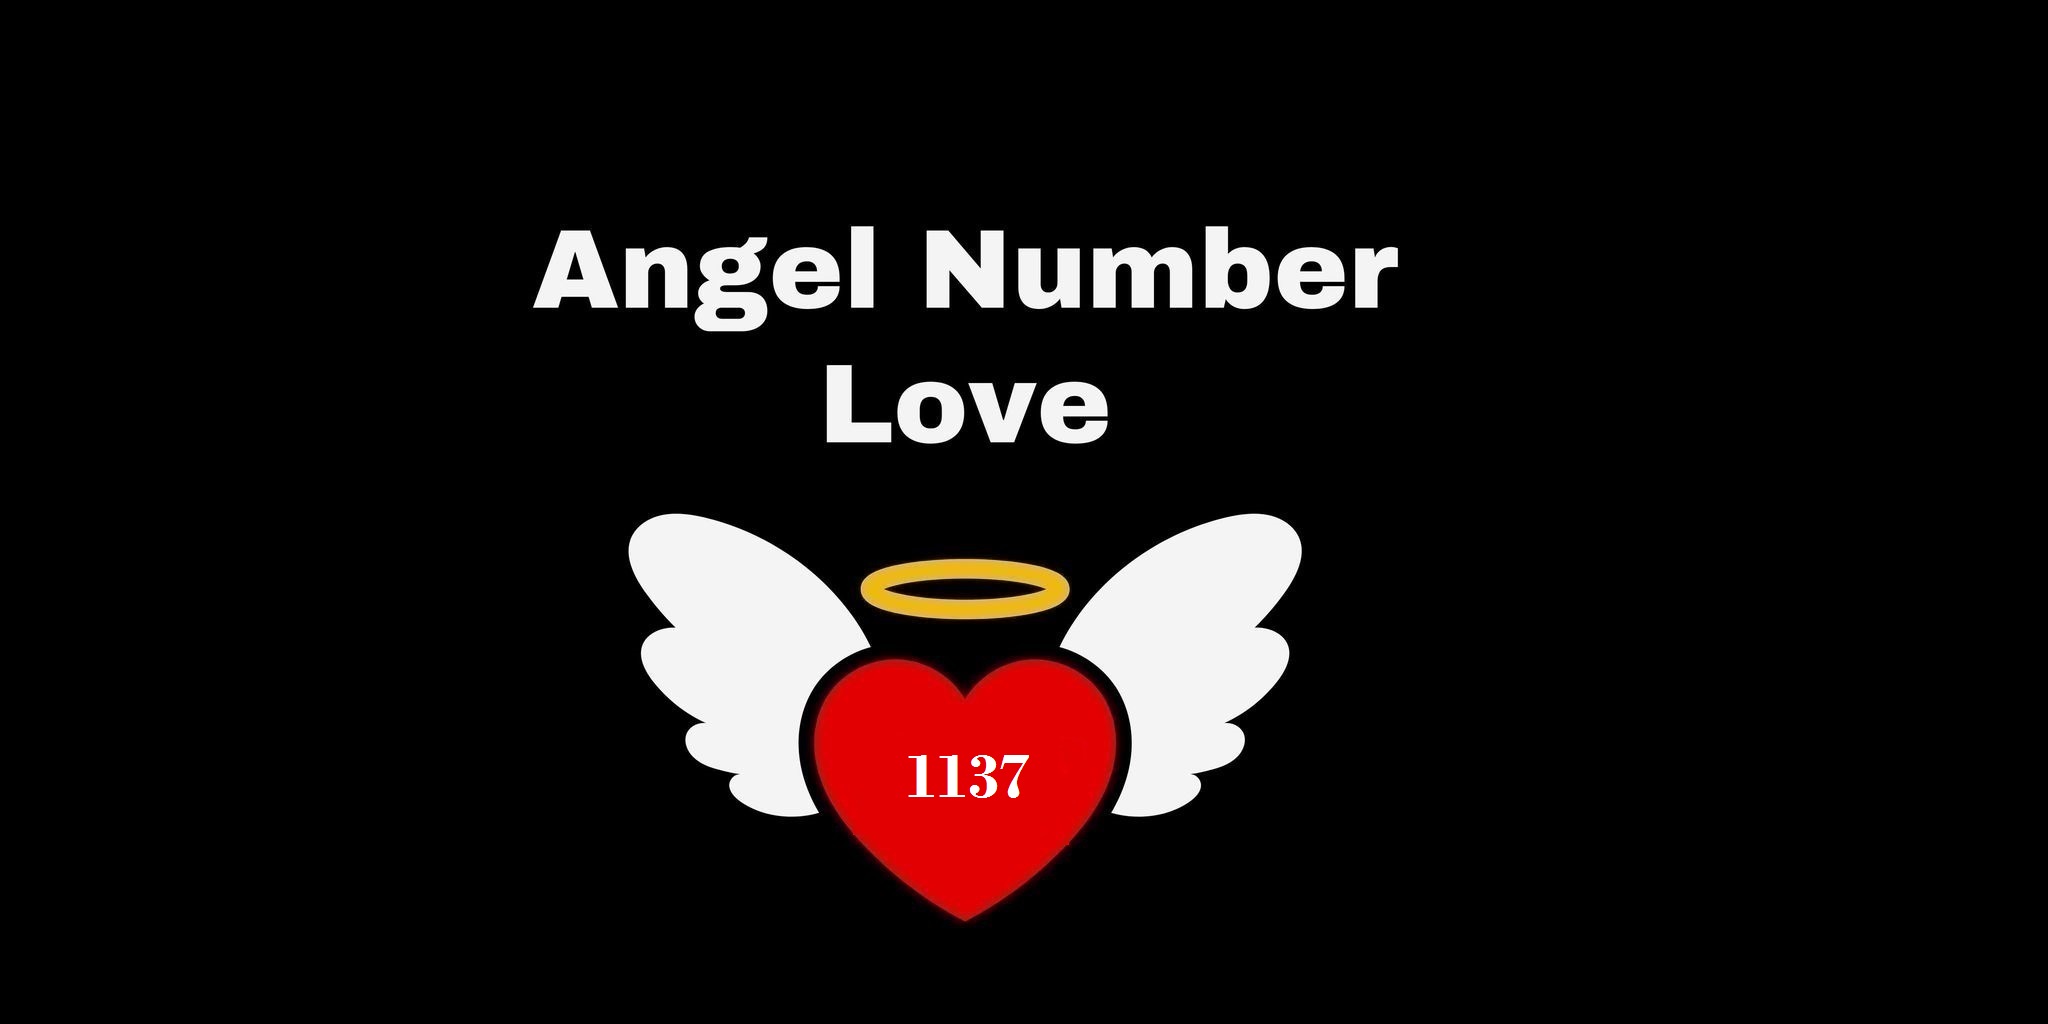 1137 Angel Number Meaning In Love